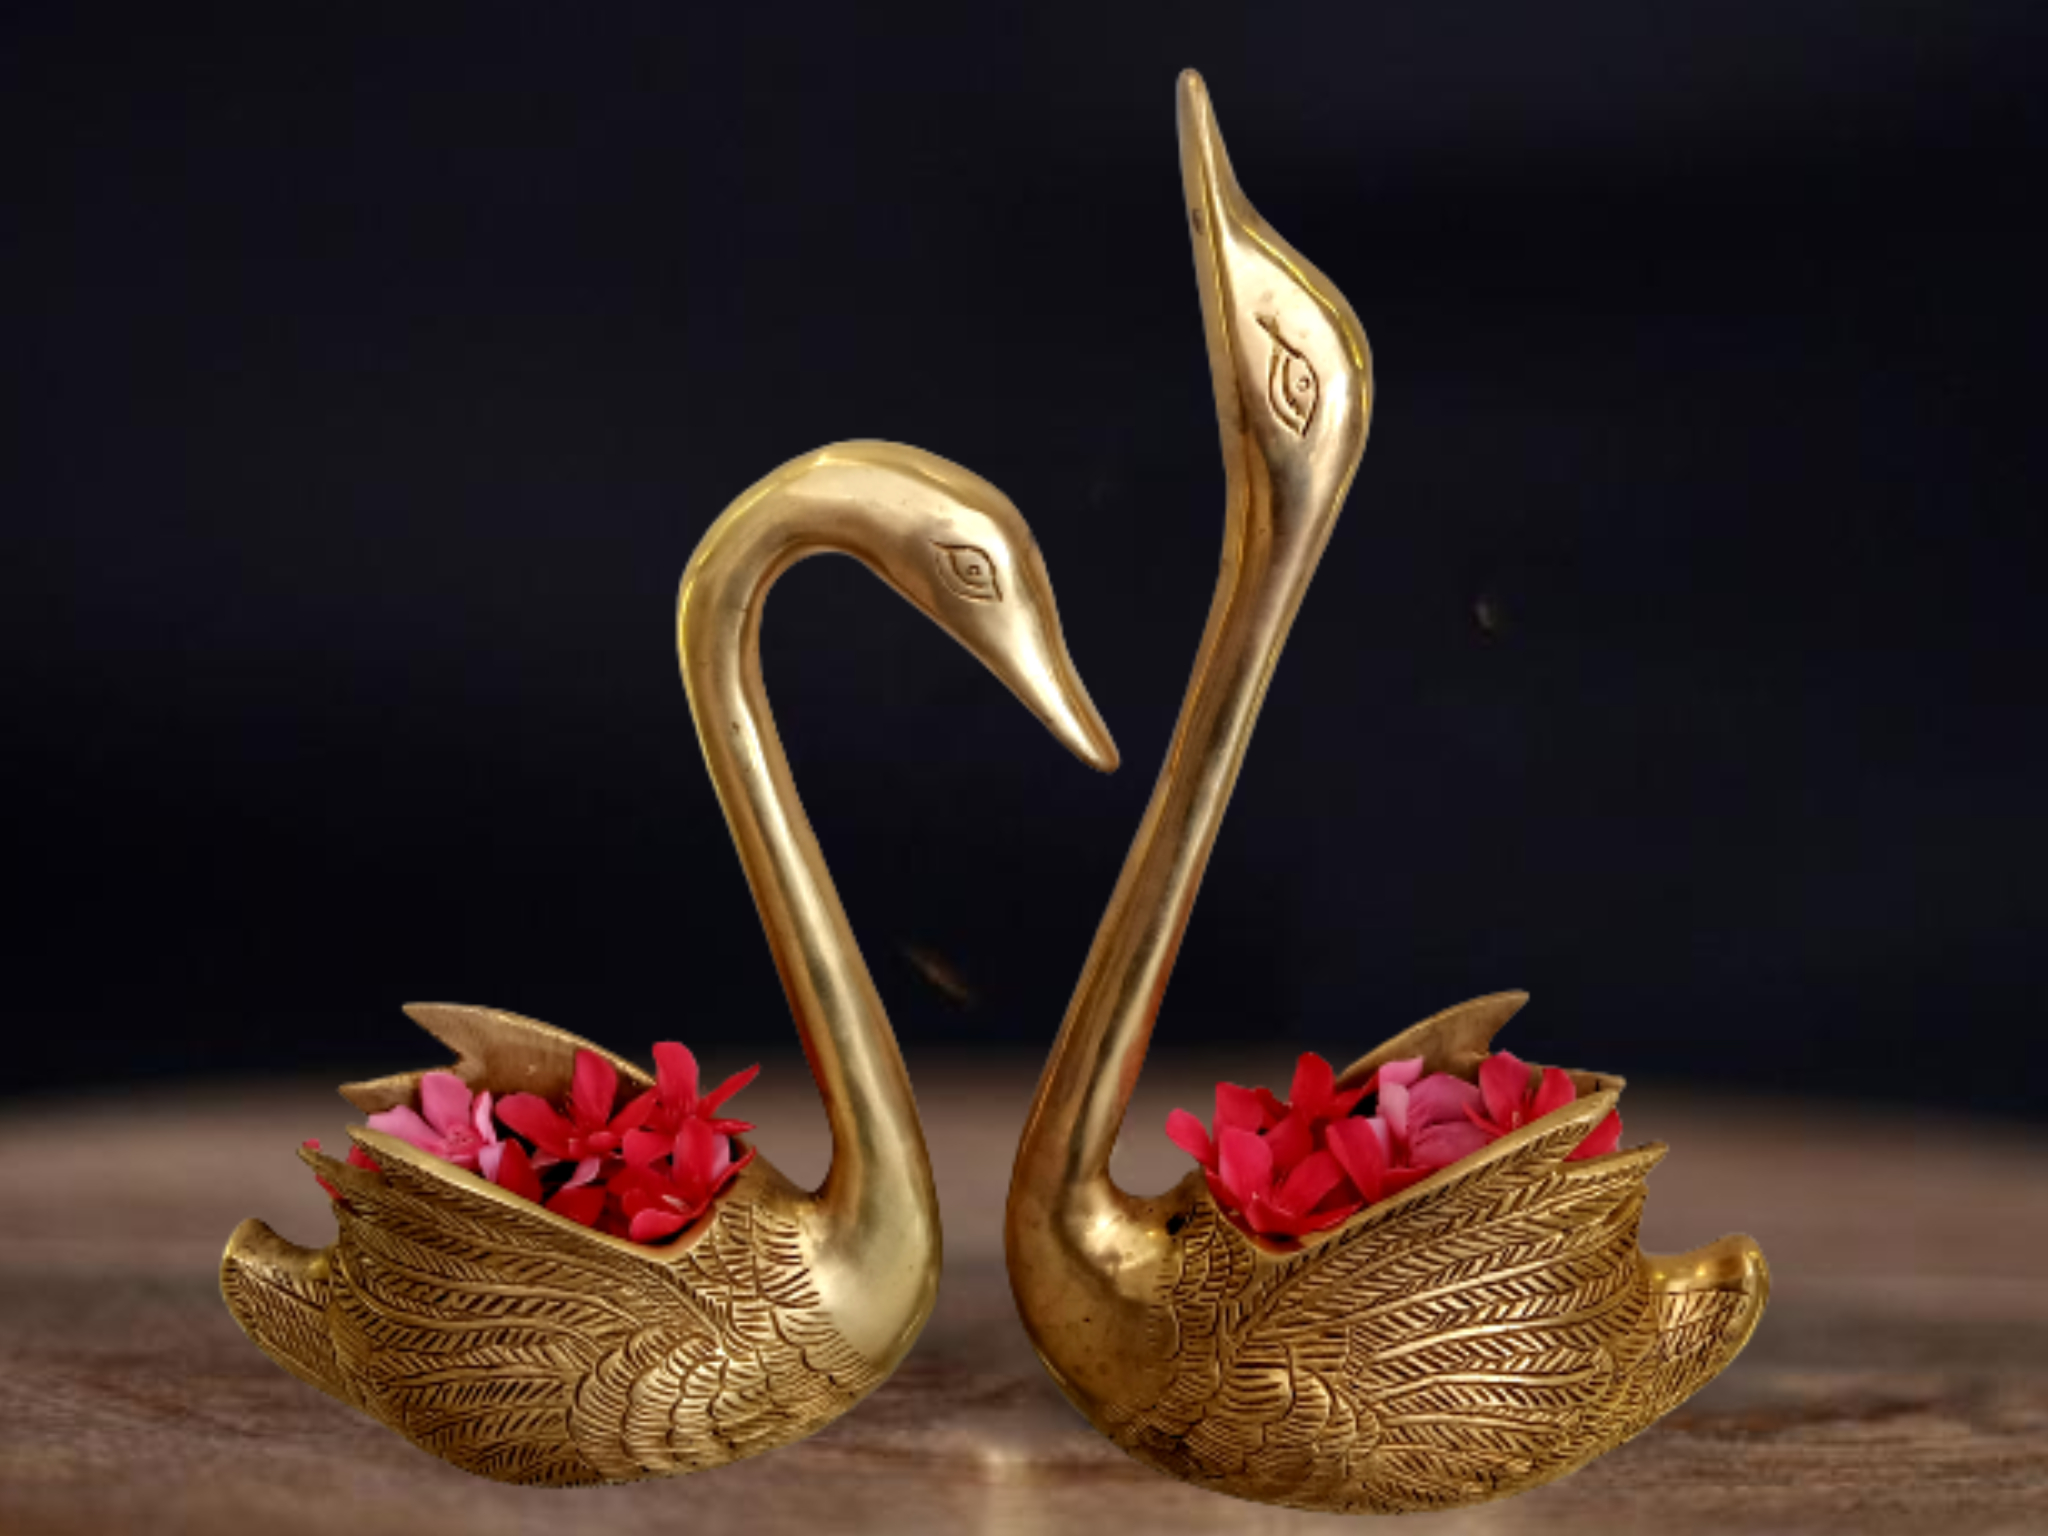 Vgocart - Brass Home Decors, Gifts, Idols - Buy Online- Free Shipping - photo